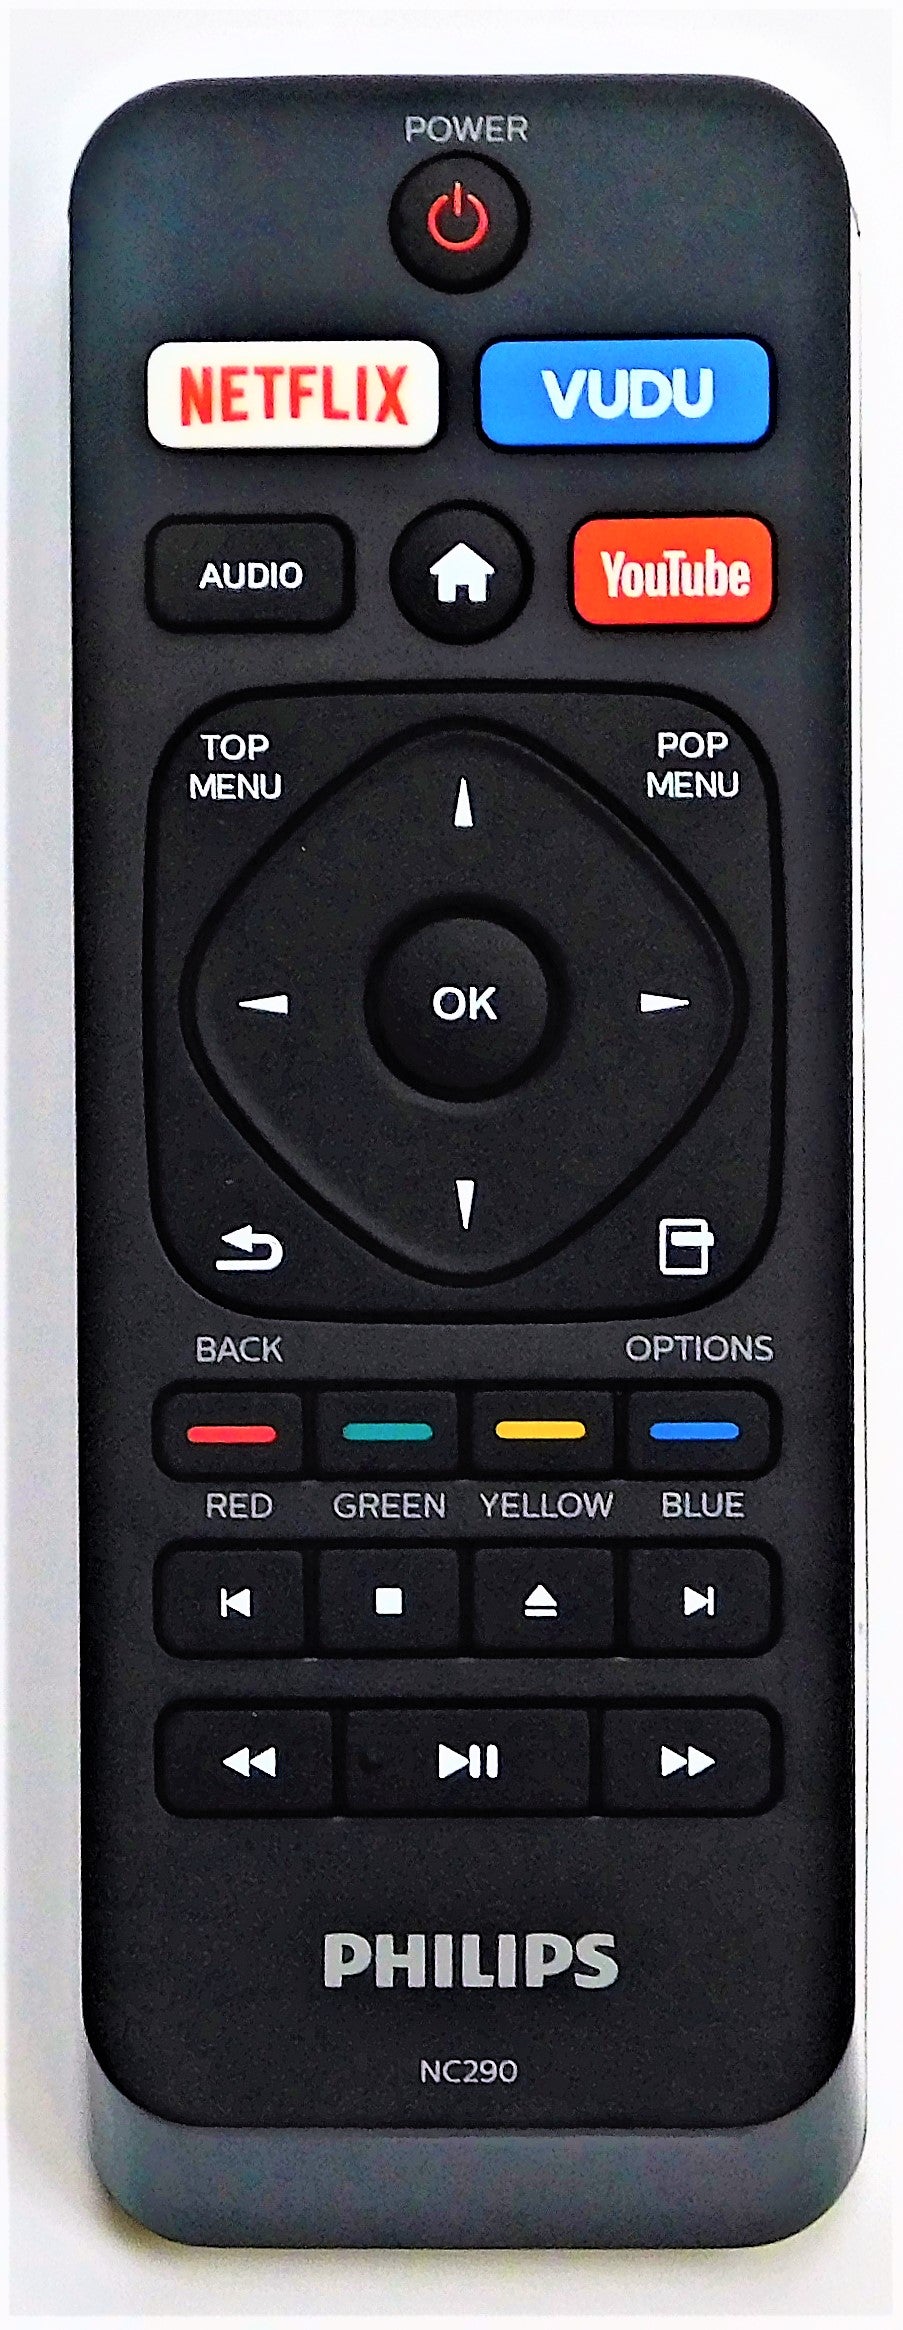 Original OEM replacement remote control for Philips Blu-ray players NC290UL